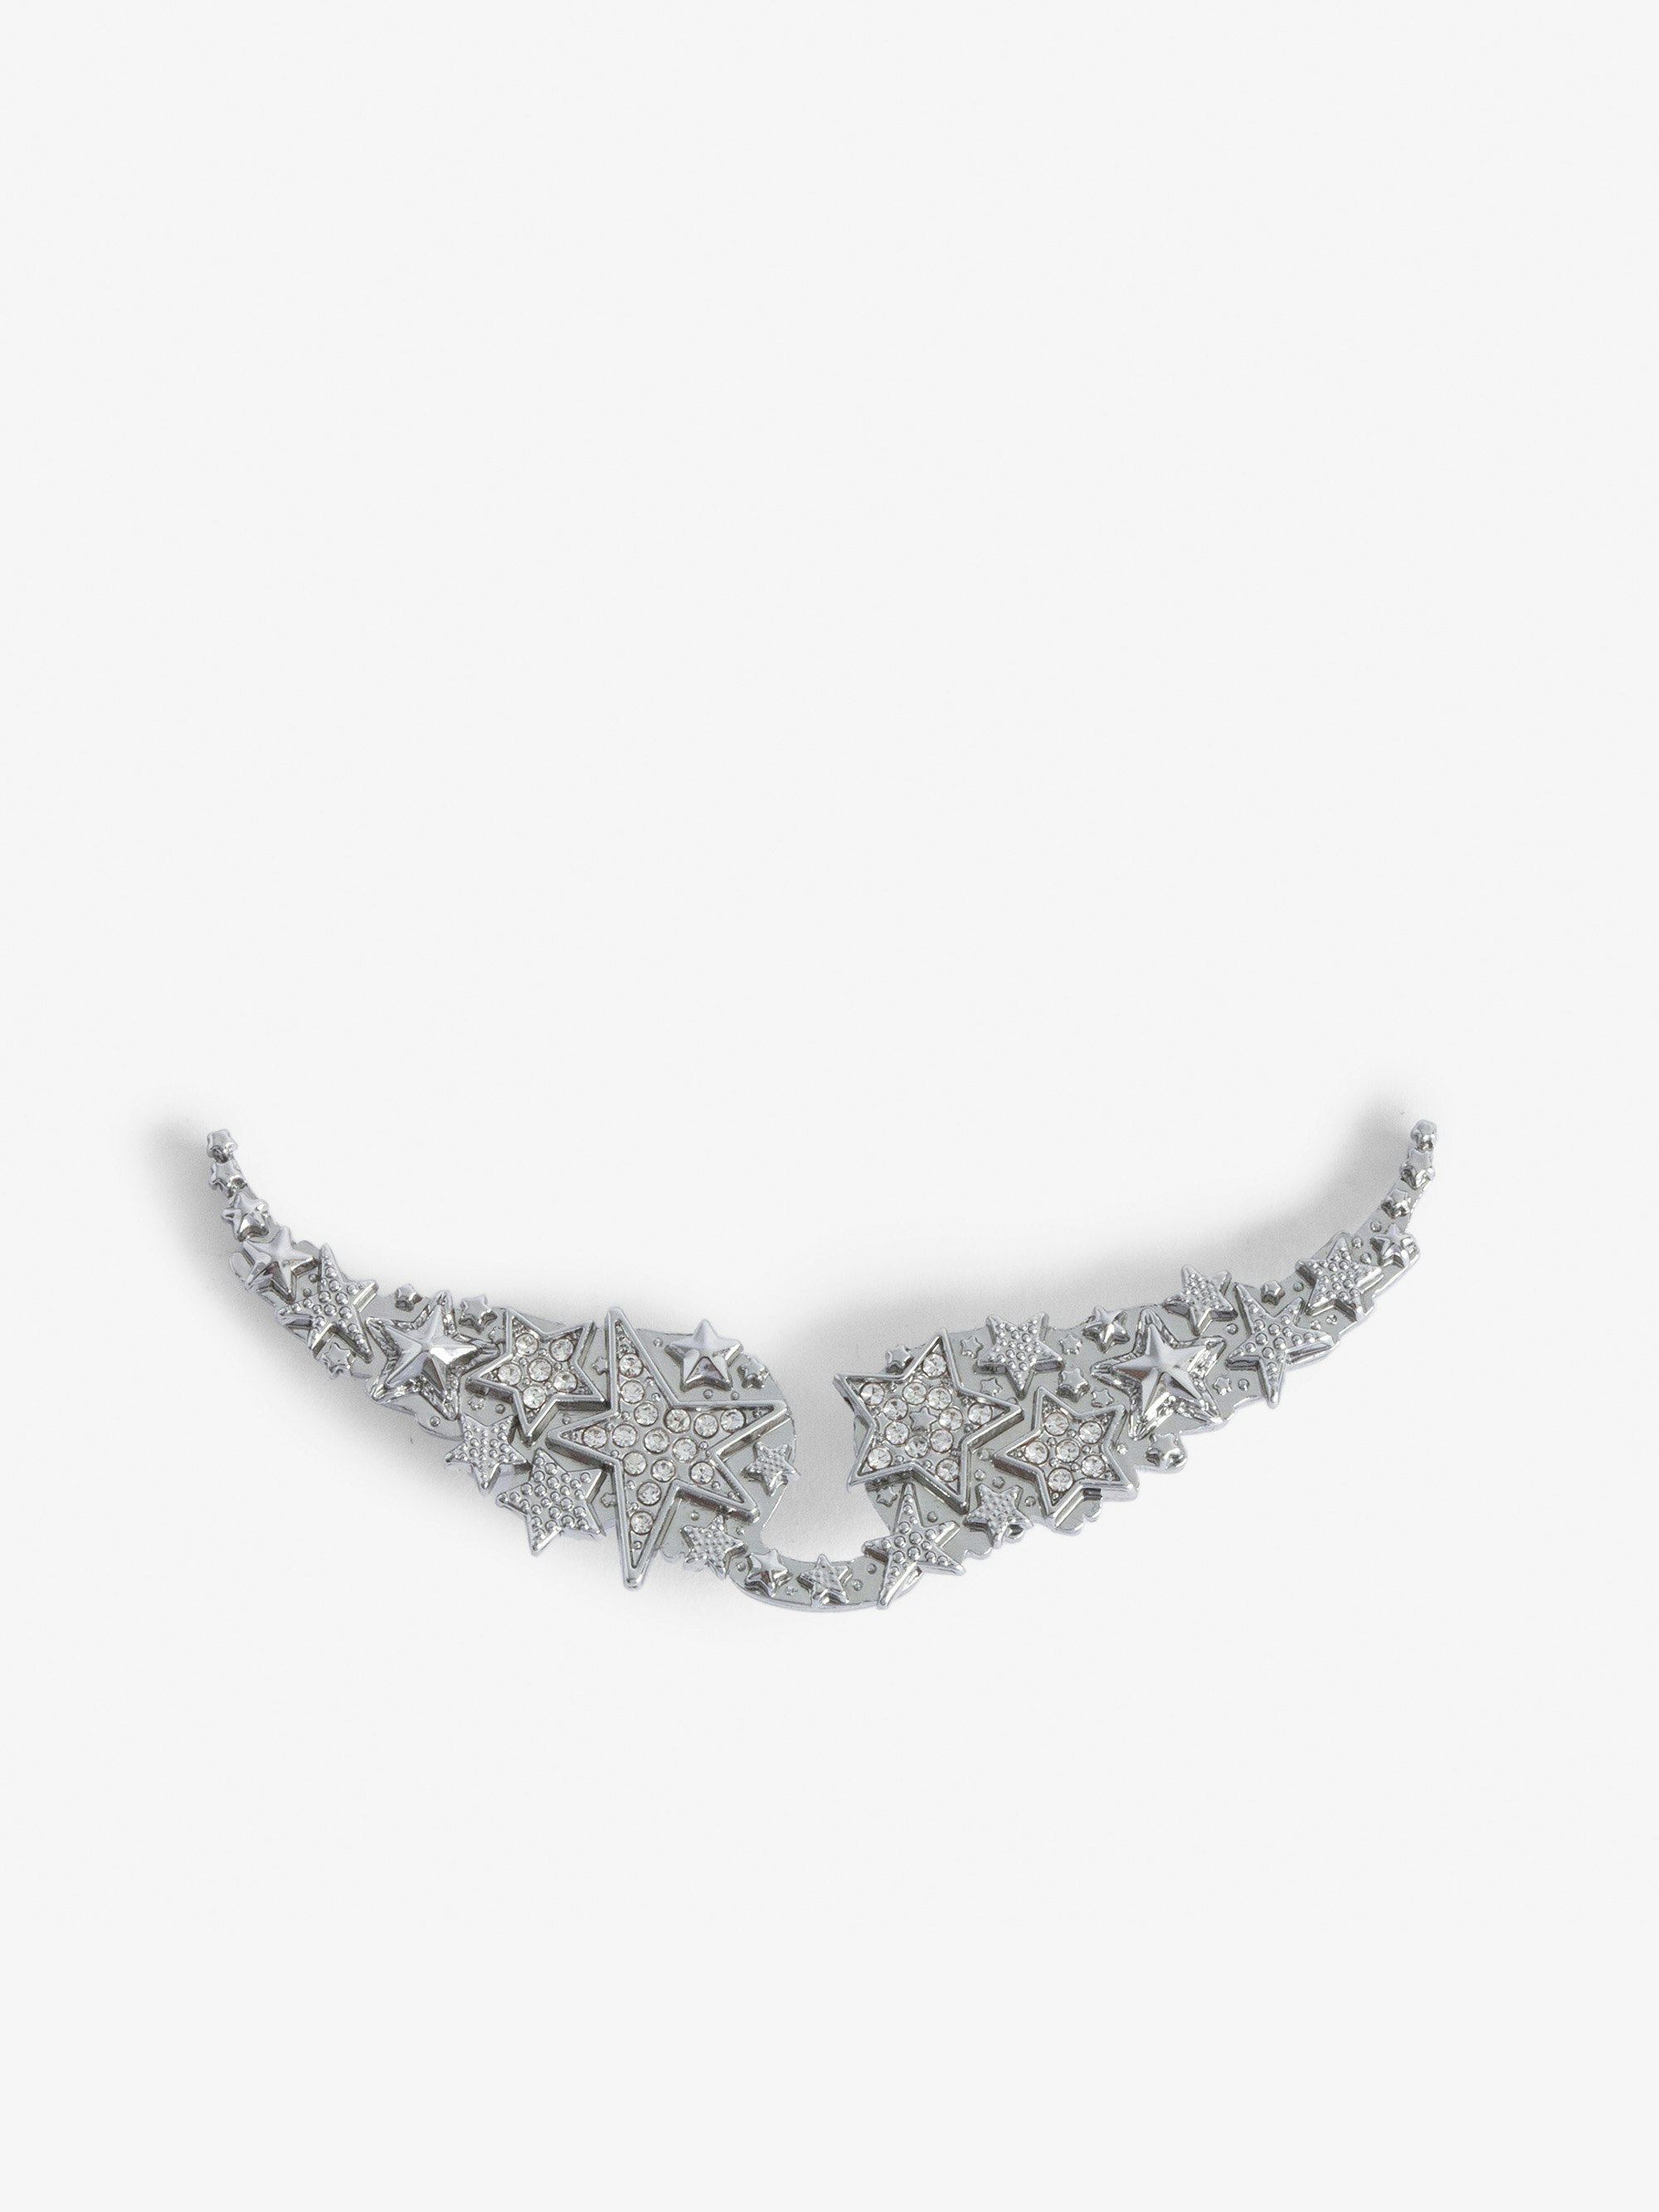 Swing Your Wings Star Diamanté Charm - Silver wings charm. with diamanté stars.